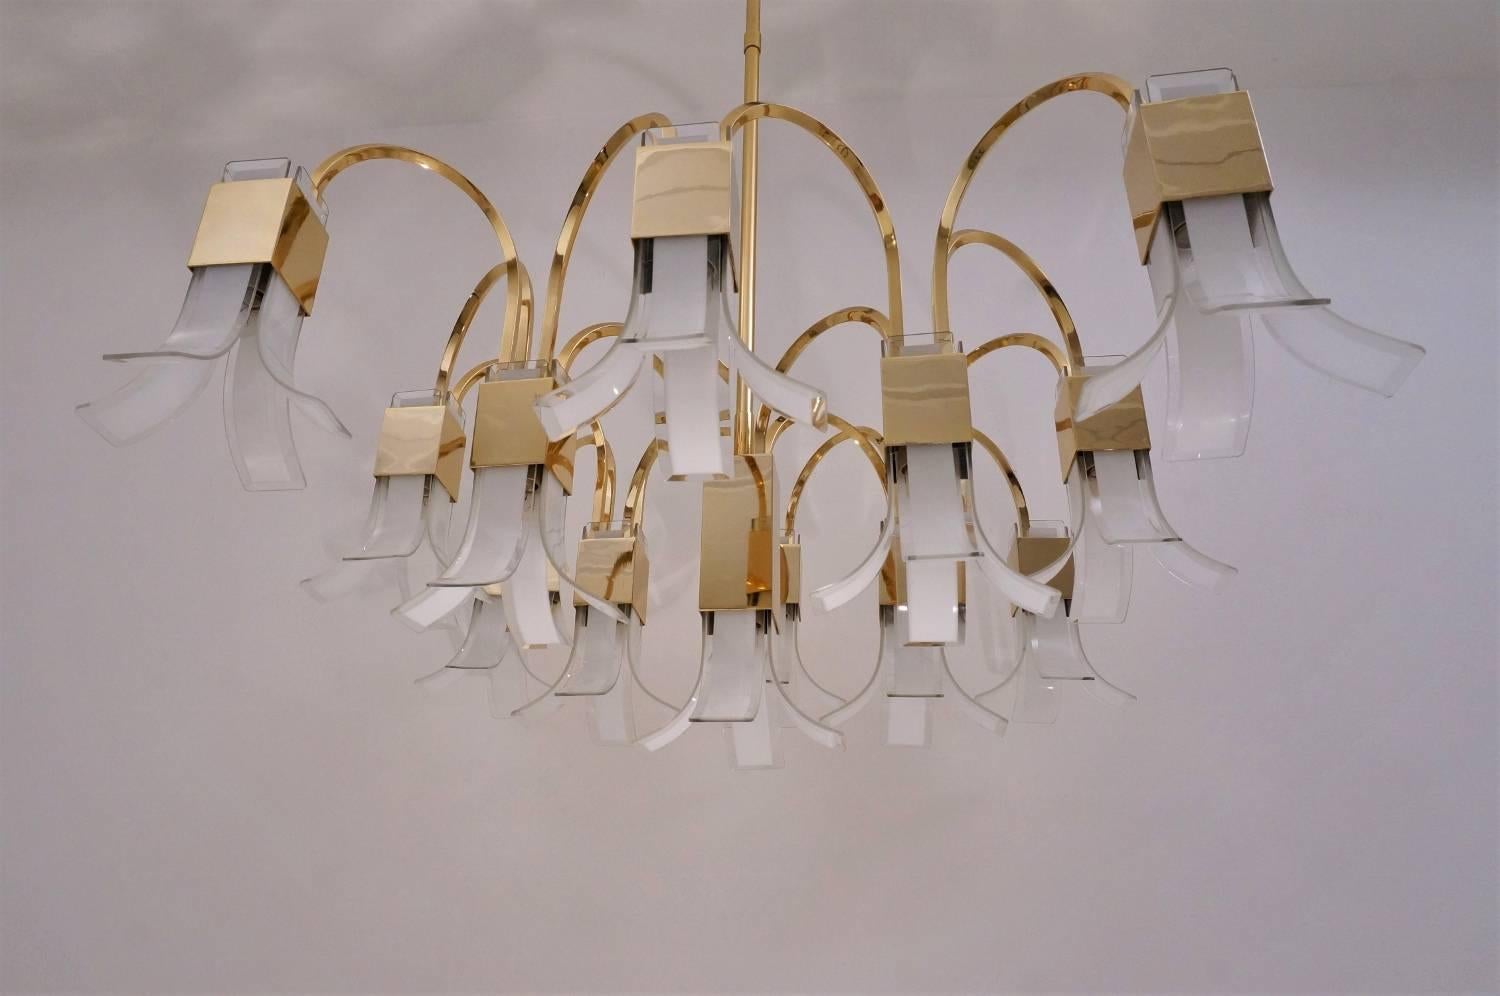 Late 20th Century Sciolari Chandelier Cubic Gold-Plated with Glass Petals, circa 1970s, Italian